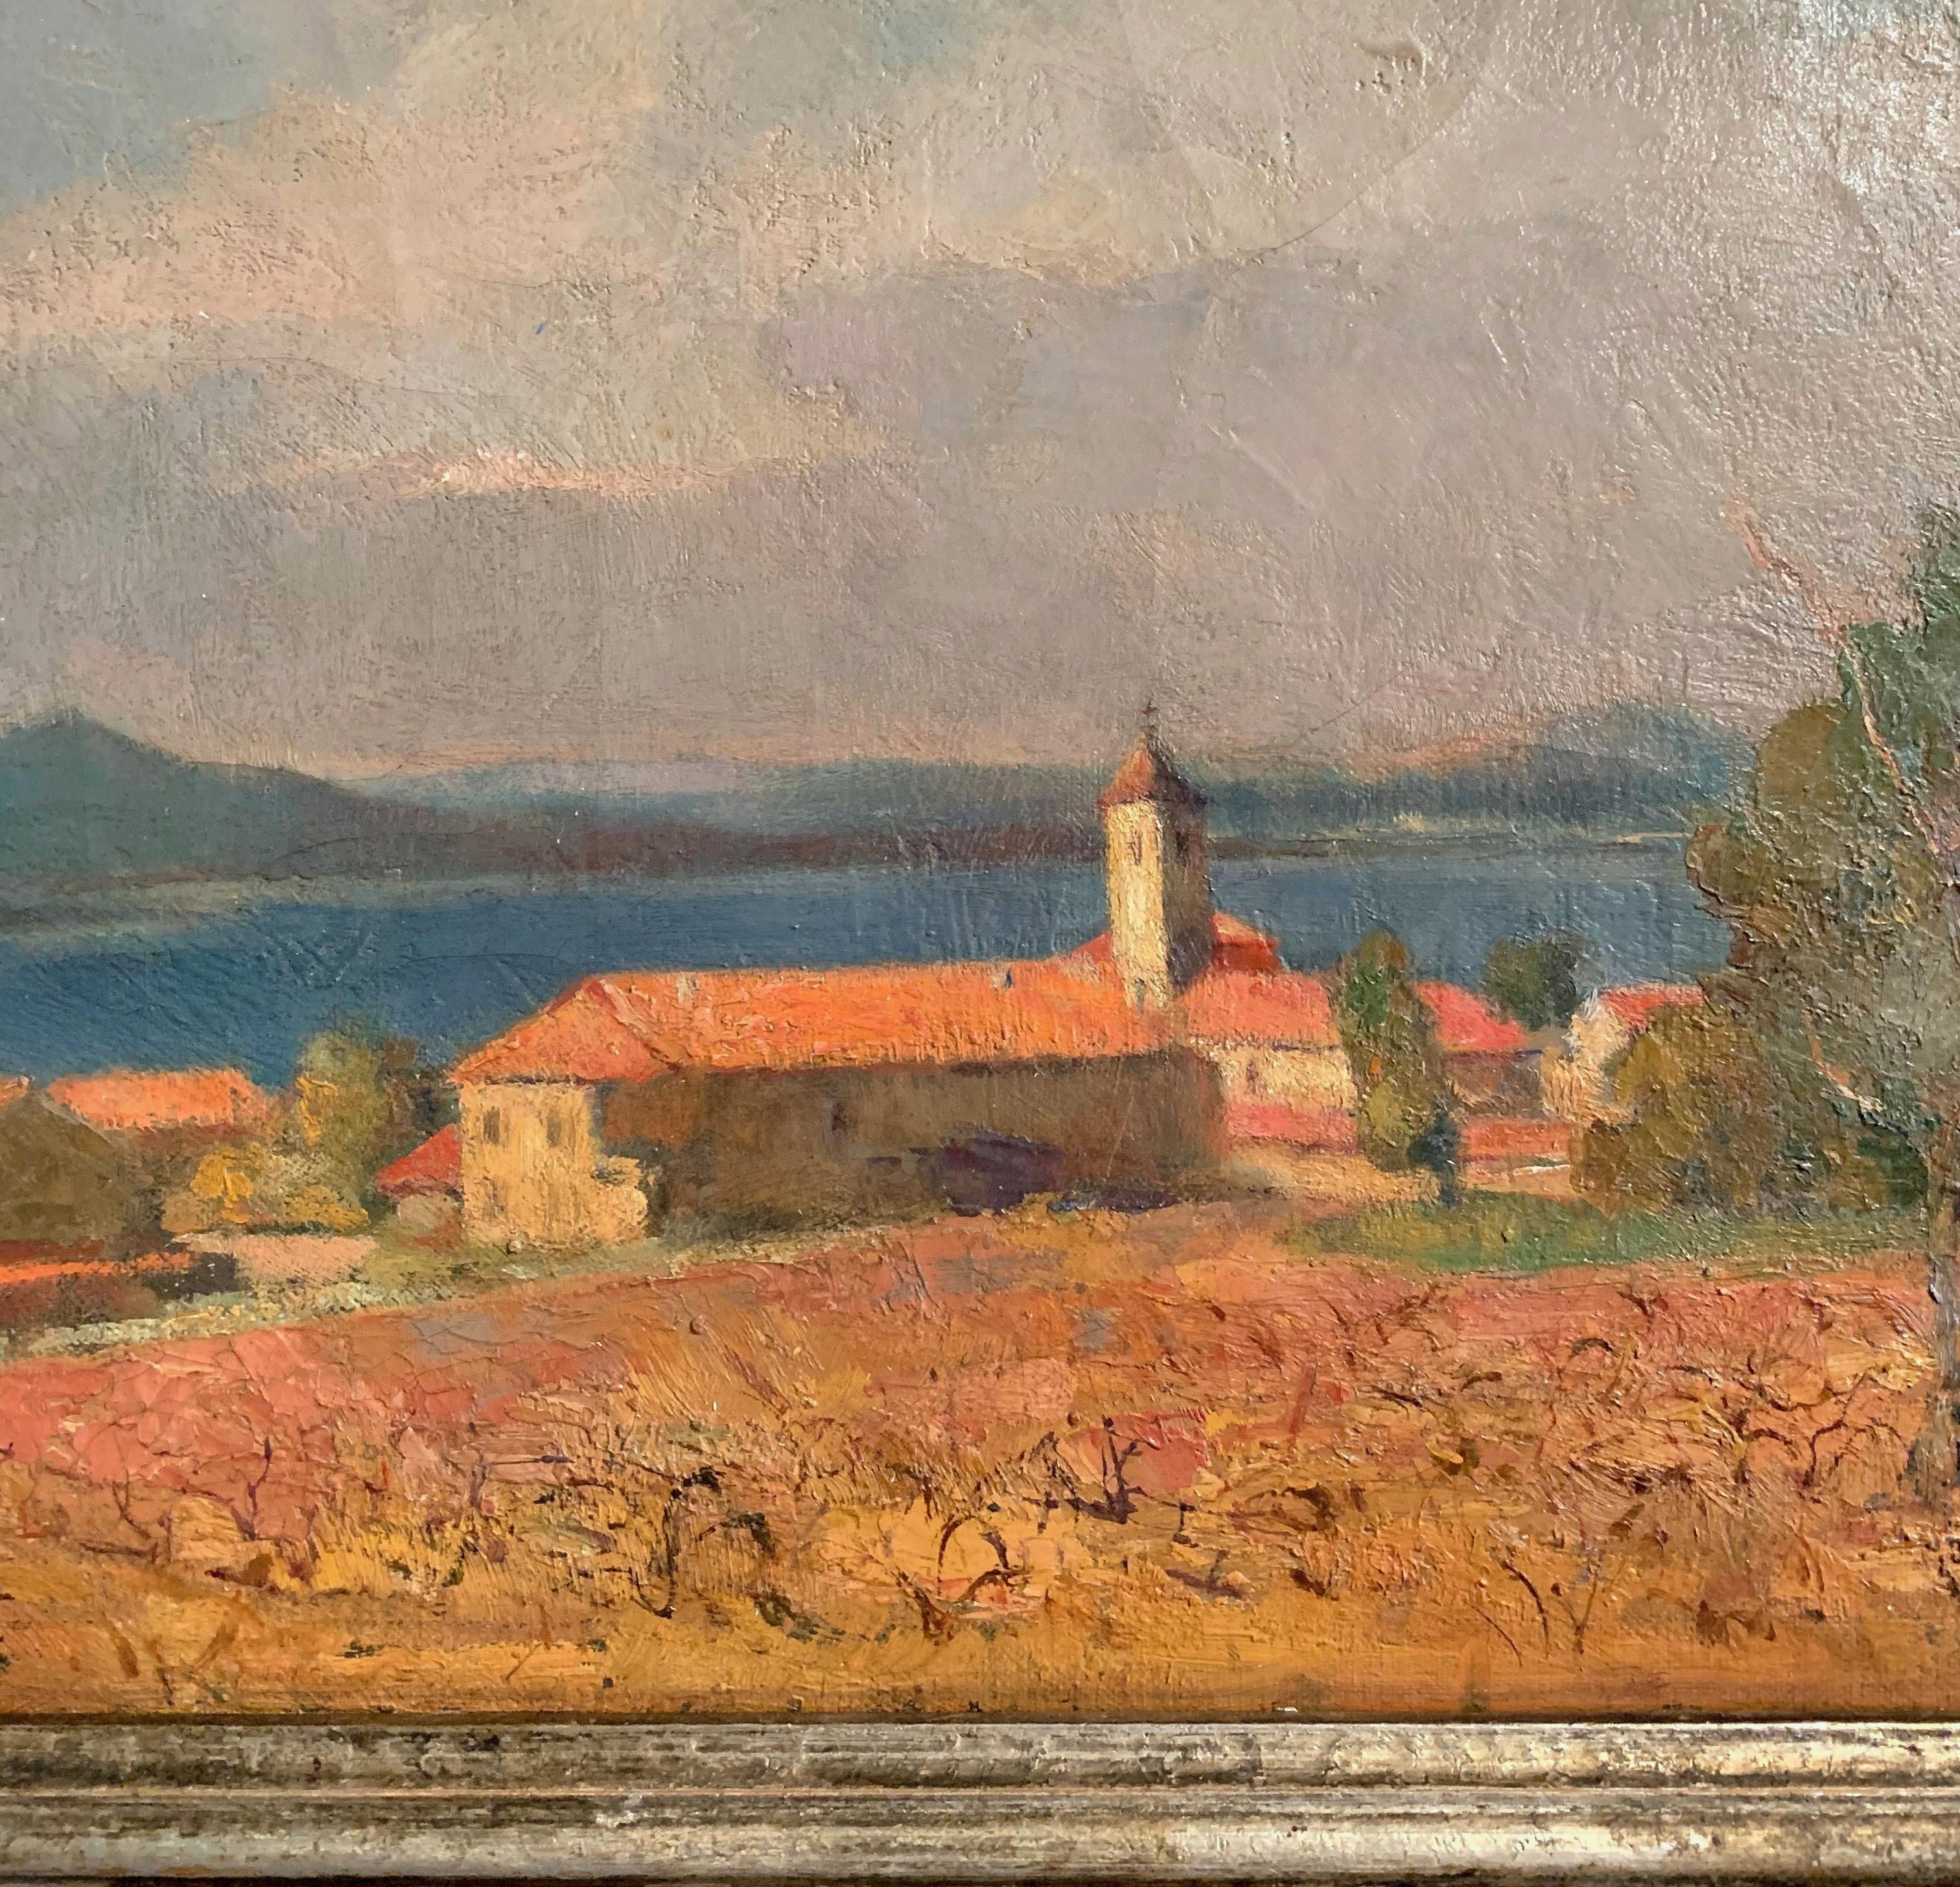 French Riviera Oil on Canvas Painting Signed G. Van Puyenbroeck, Dated 1932 For Sale 1